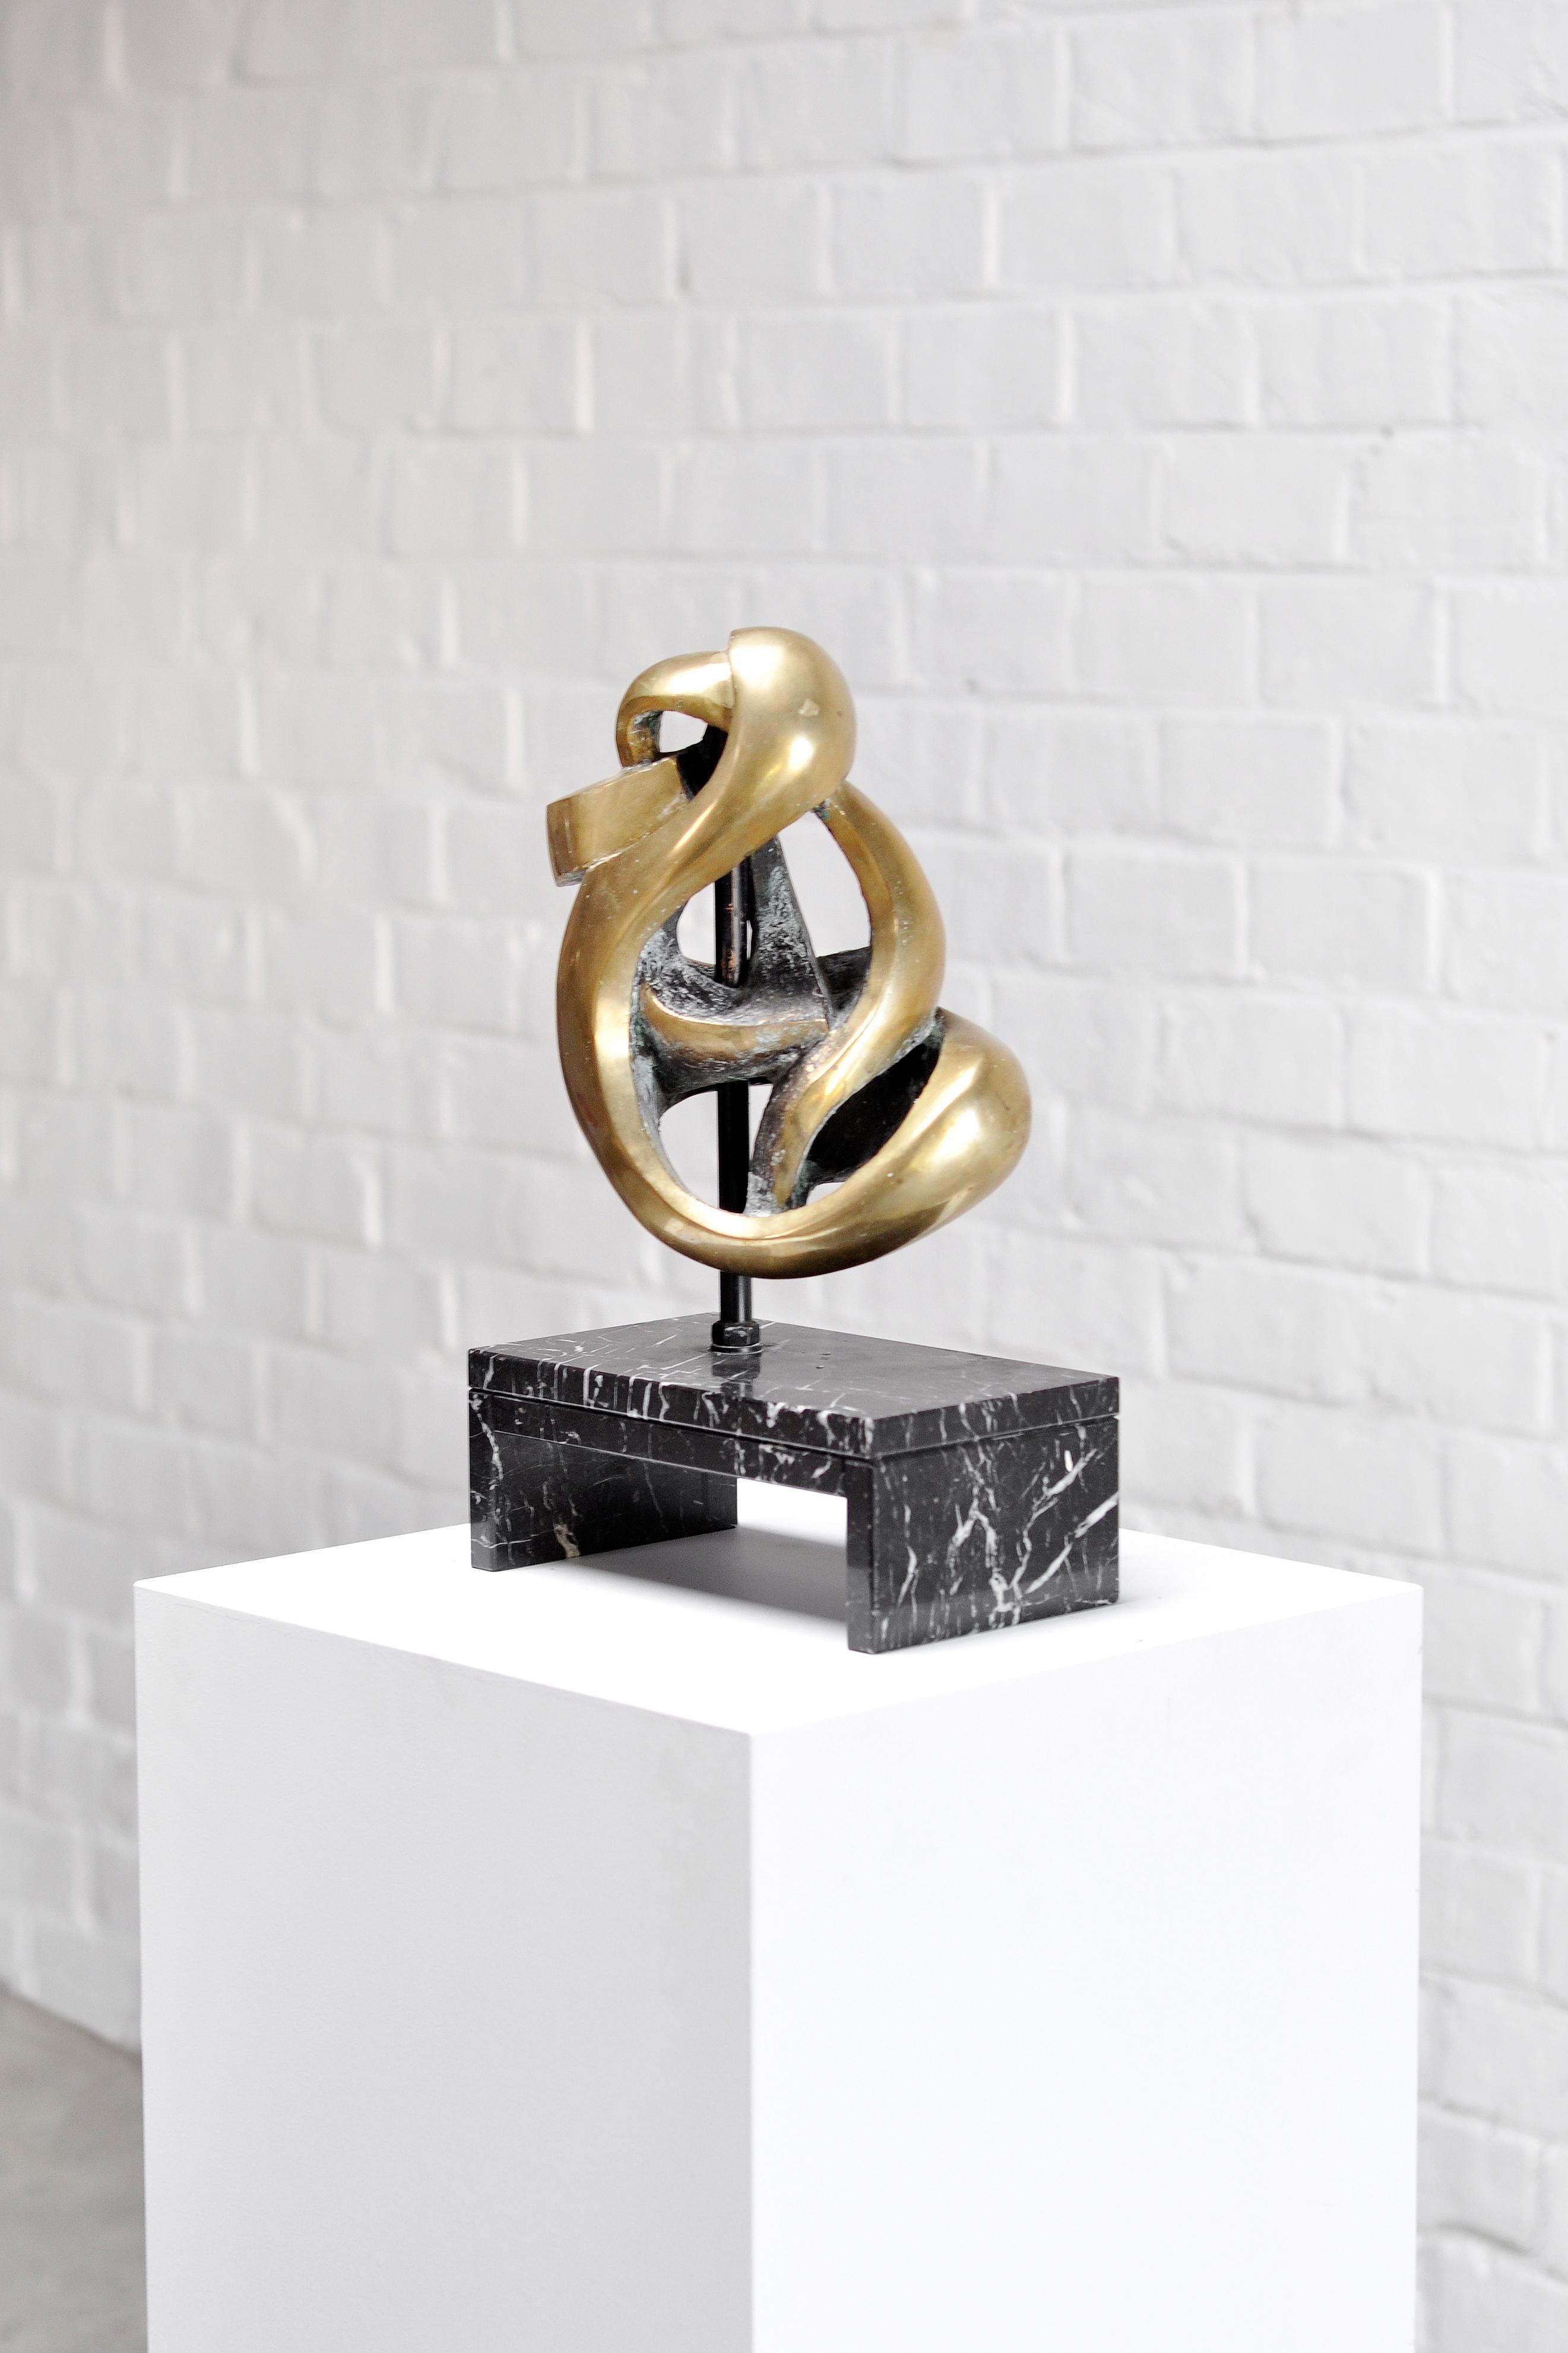 A beautiful abstract bronze sculpture on a black marble base in the style of Belgian artist Jean-Pierre Ghysels. Unsigned. This piece has an amazing and different presence from every angle. Conveys the spirit of modernism from the early 70's. Cast